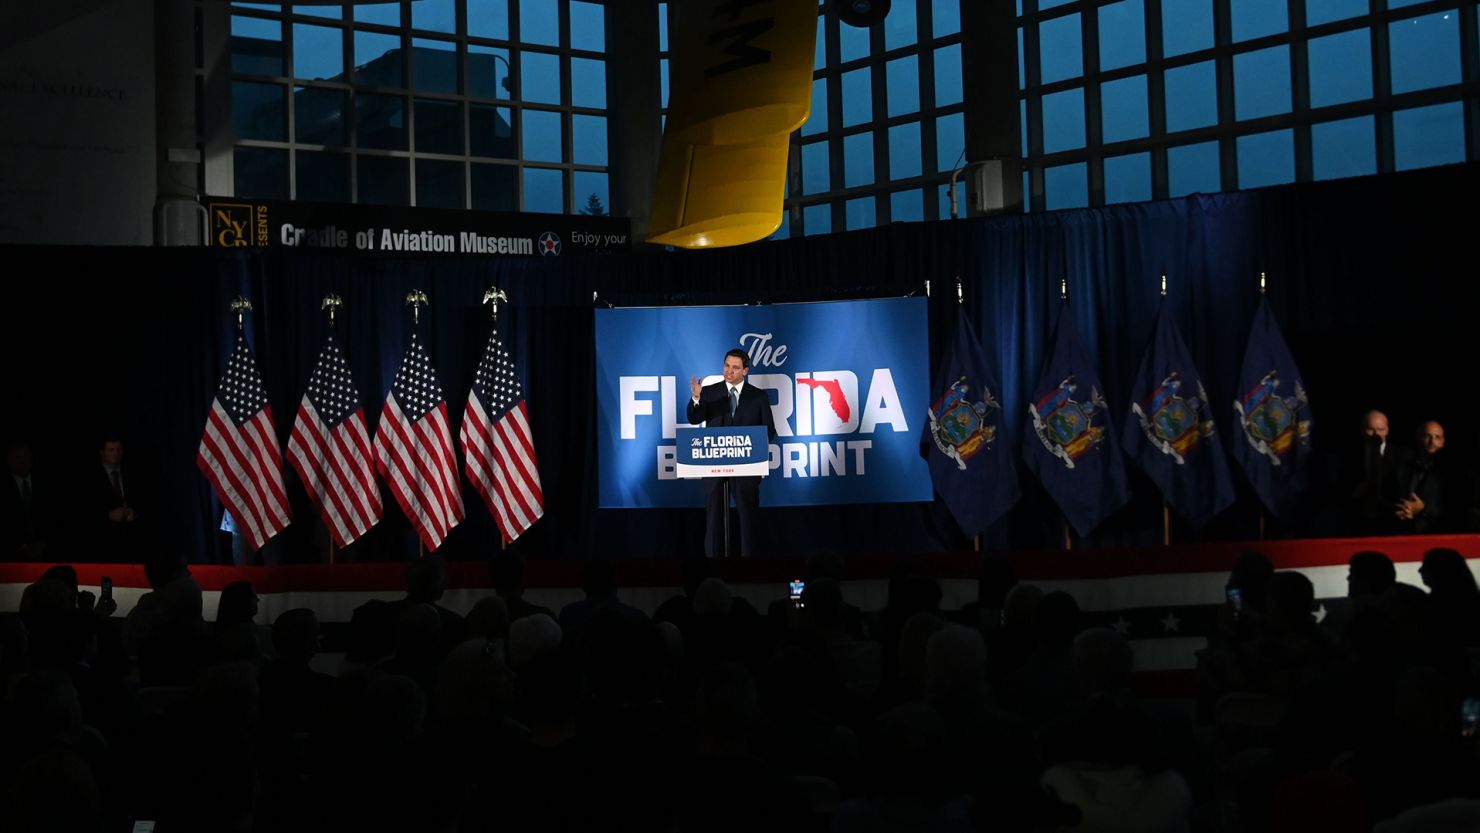 Florida Gov. Ron DeSantis delivers remarks on "And To The Republic: The Florida Blueprint" at the Cradle of Aviation Museum in Garden City, New York, on April 1. 